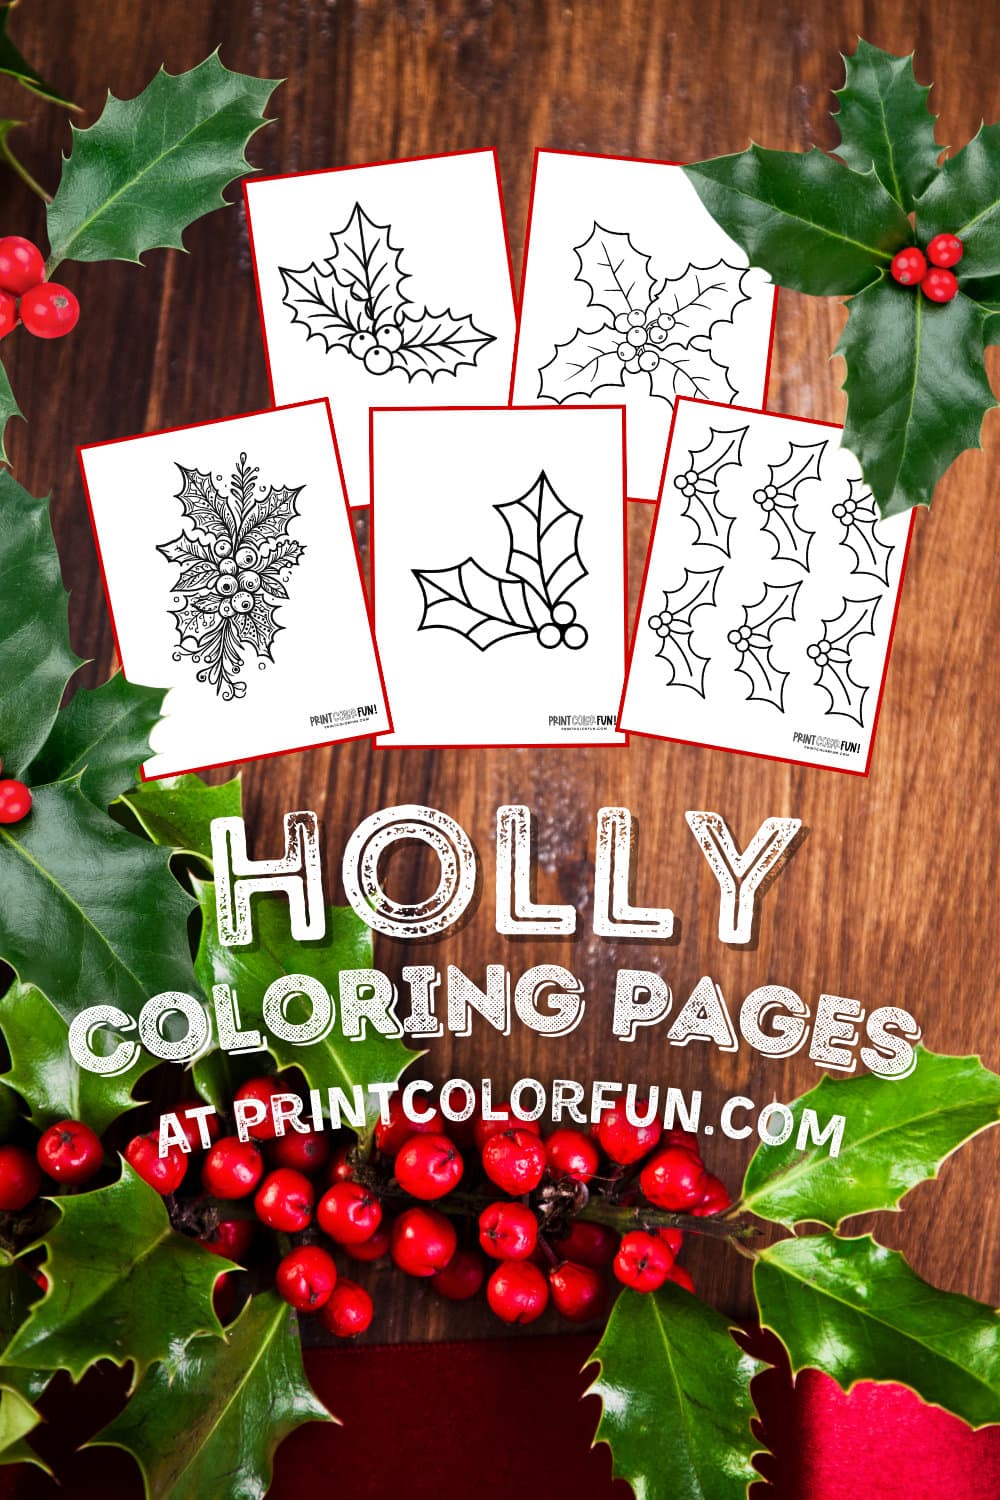 Holly Christmas coloring pages and clipart - PrintColorFun com